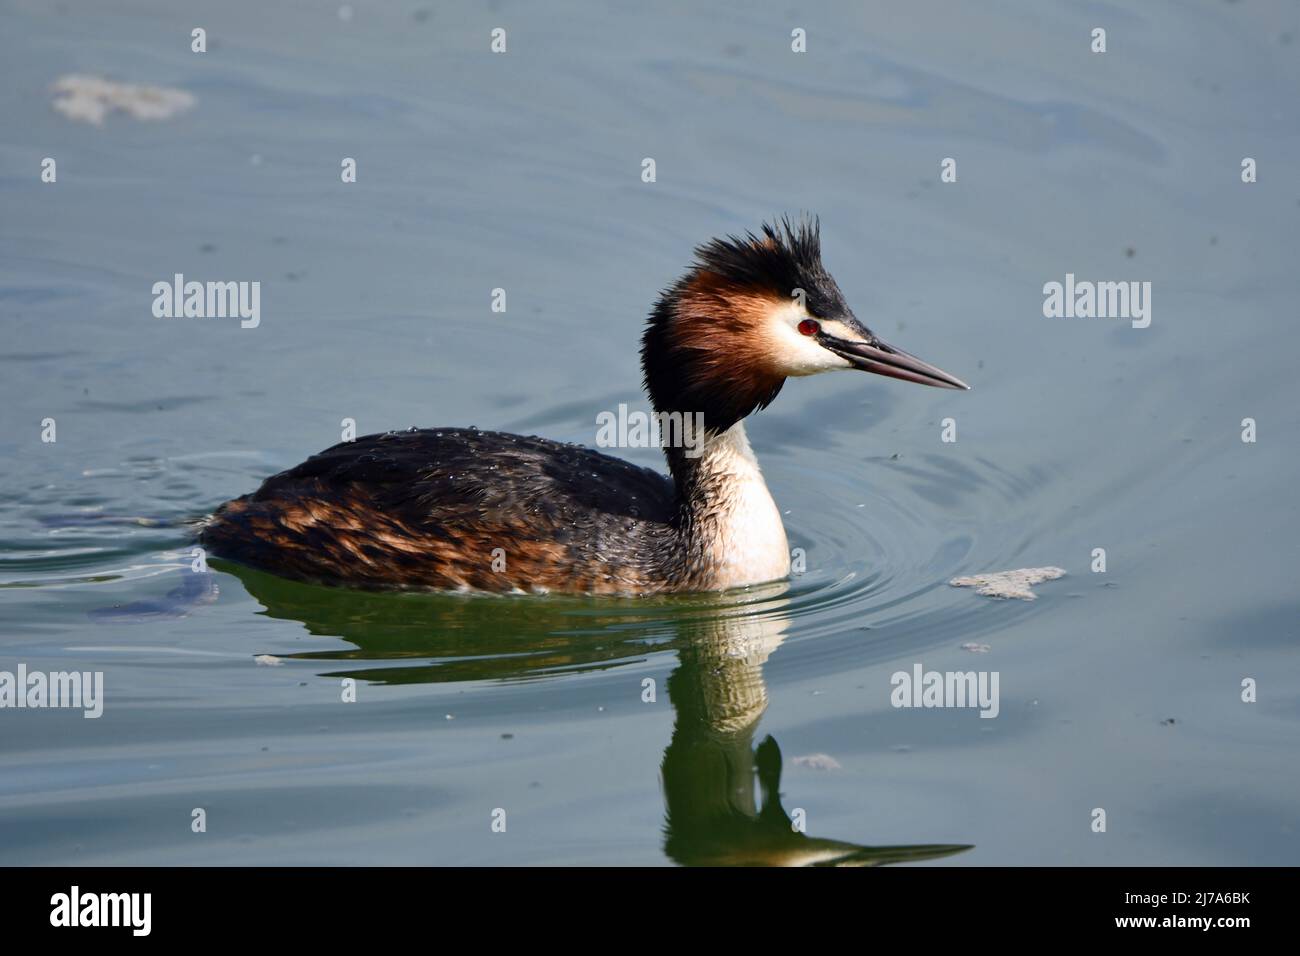 A Great Crested Grebe on the water. Wildlife on Tring Reservoirs, near Aston Clinton, Buckinghamshire, UK Stock Photo